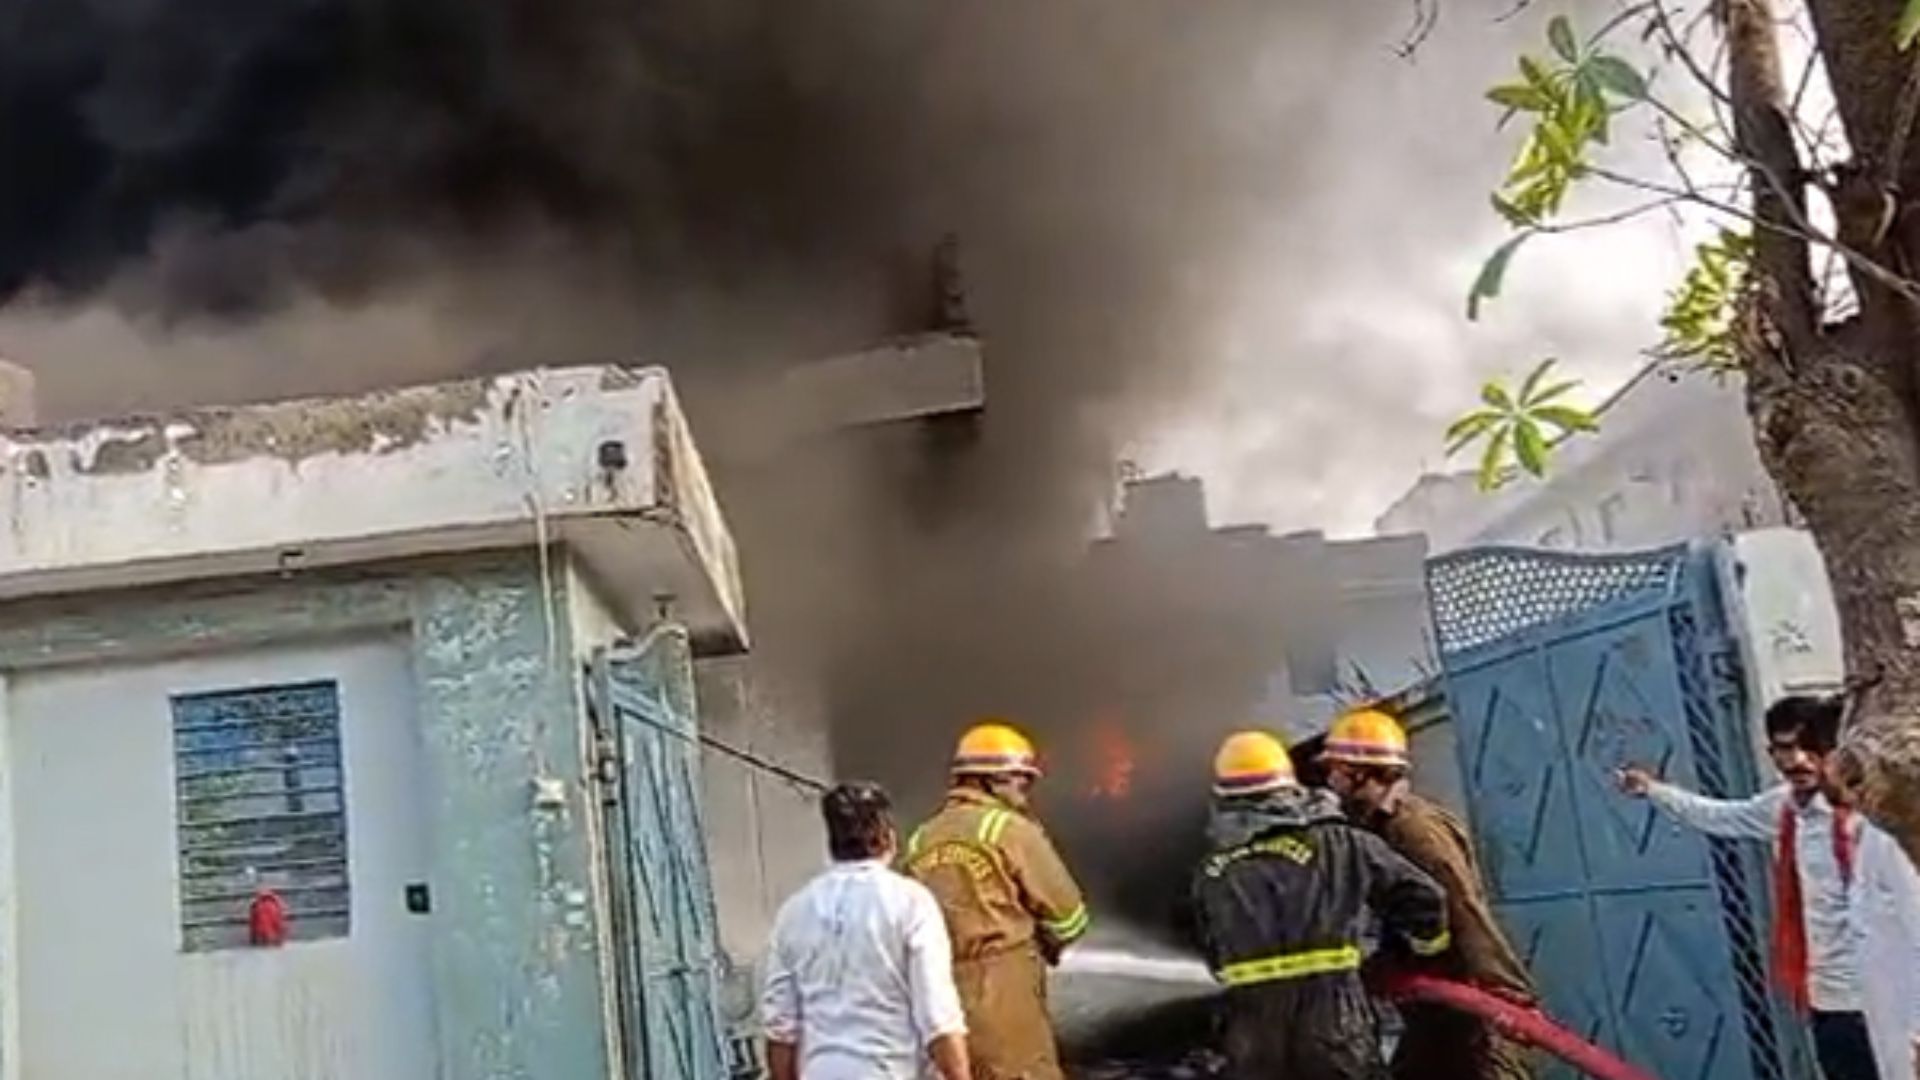 Fire breaks out at eyeglasses factory in UP’s Ghaziabad, none hurt